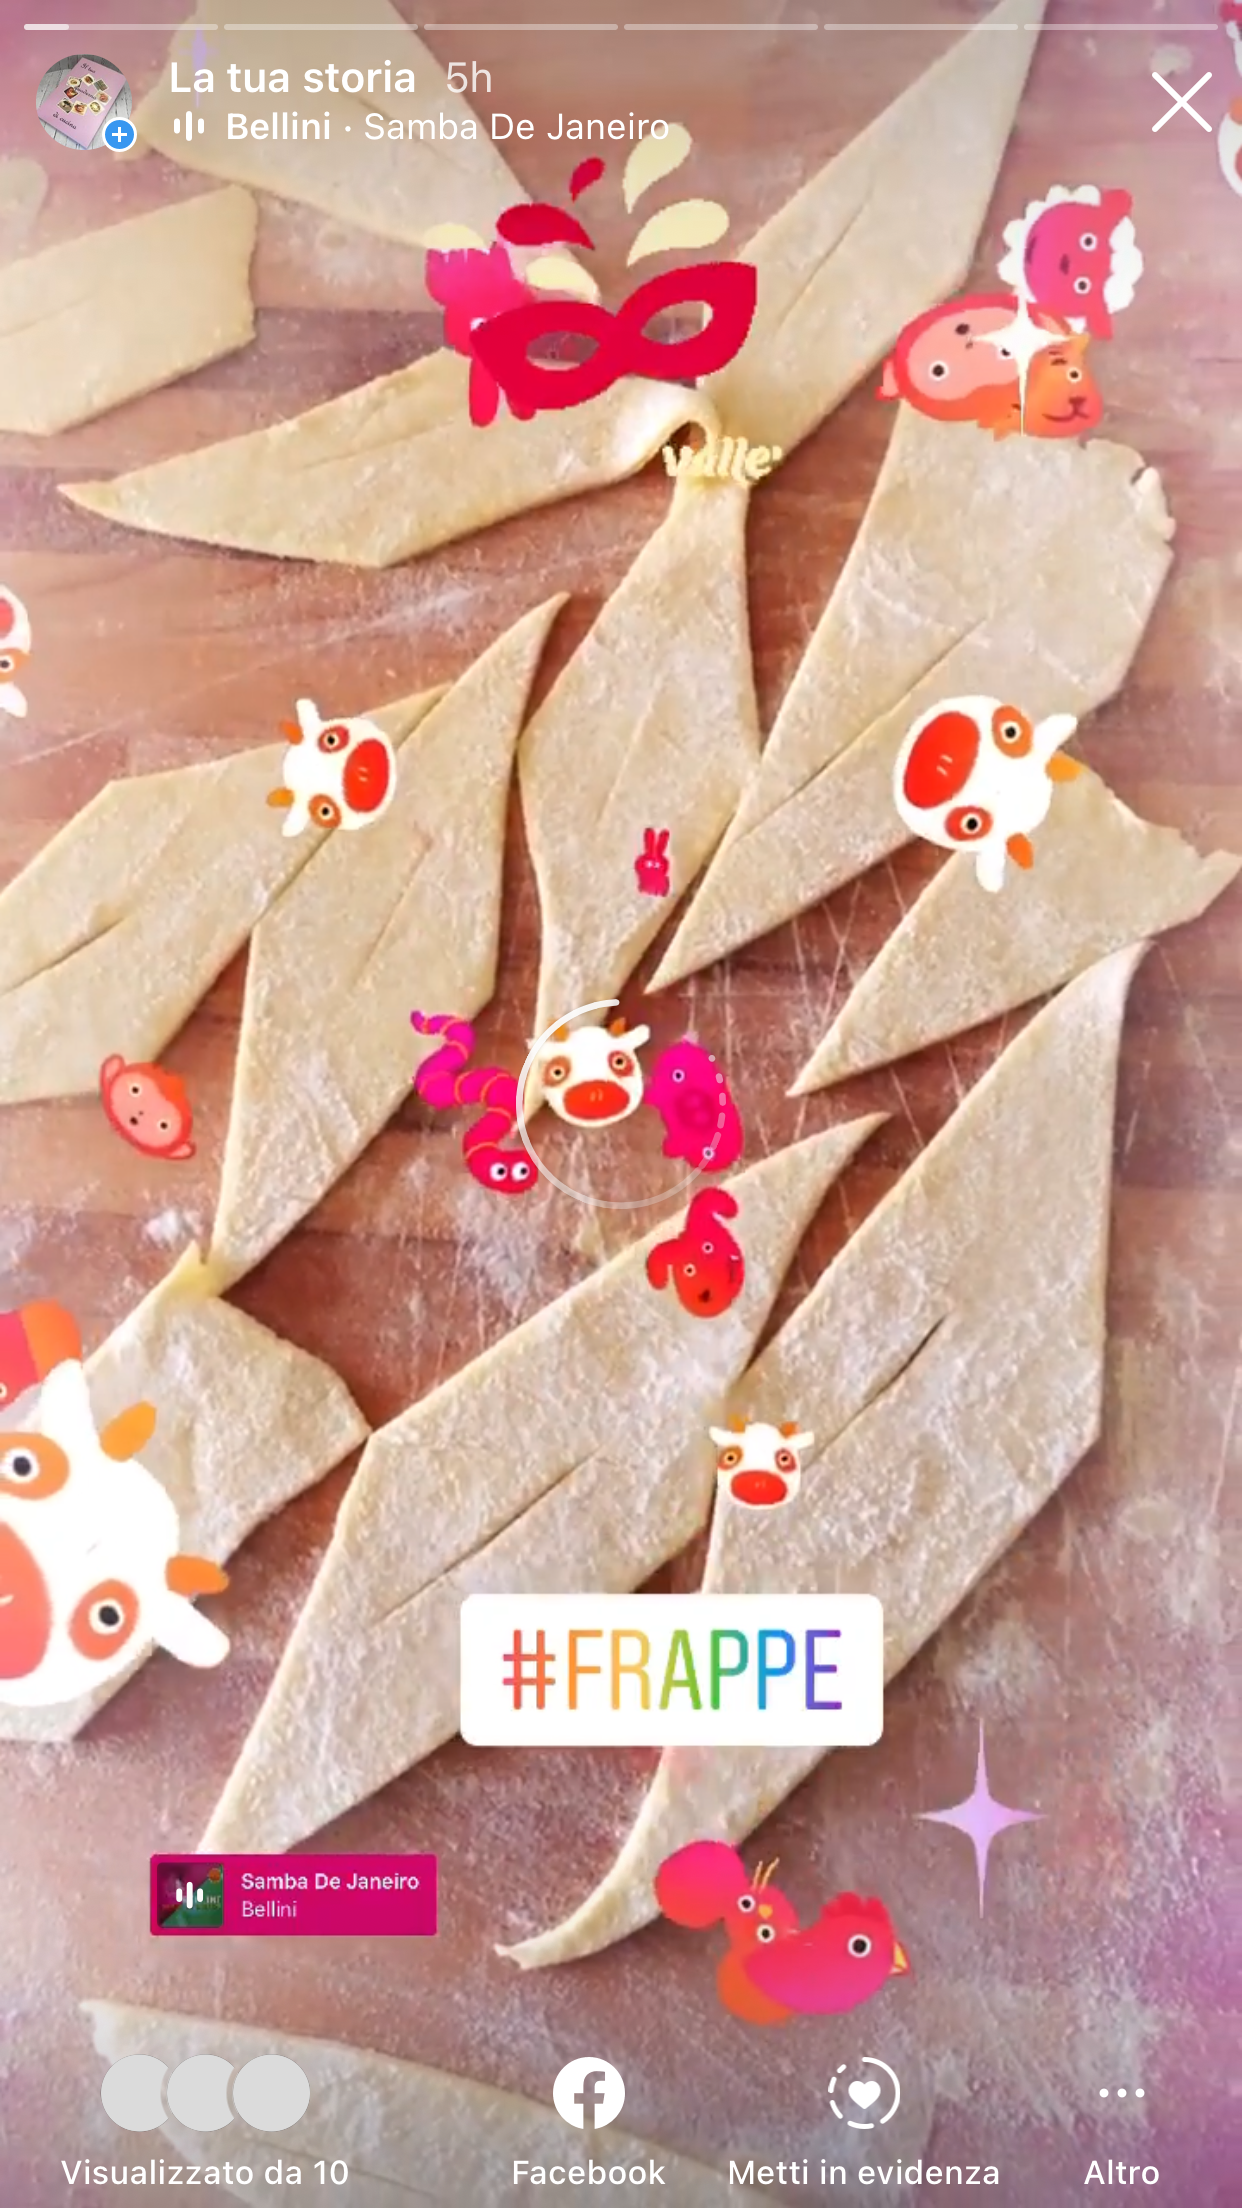 Frappe - Chiacchiere